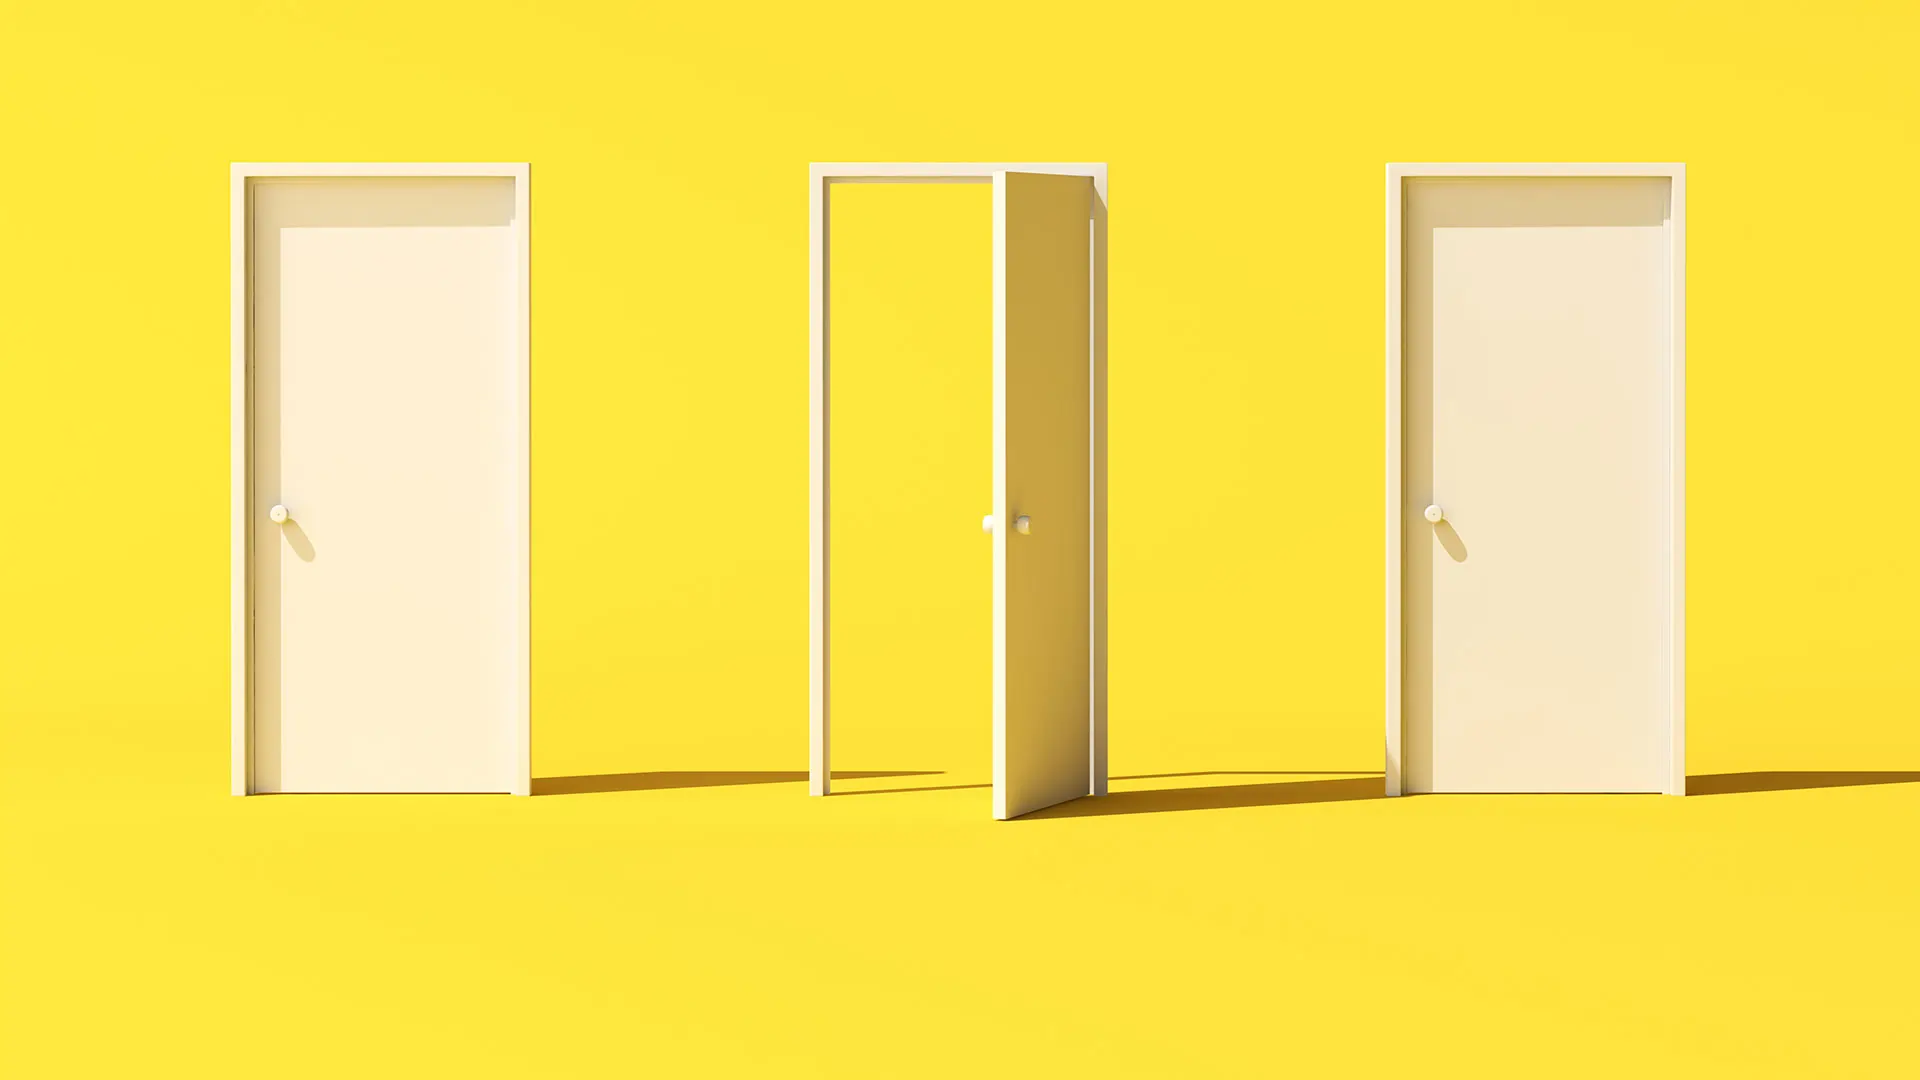 two closed doors and one open door on yellow background